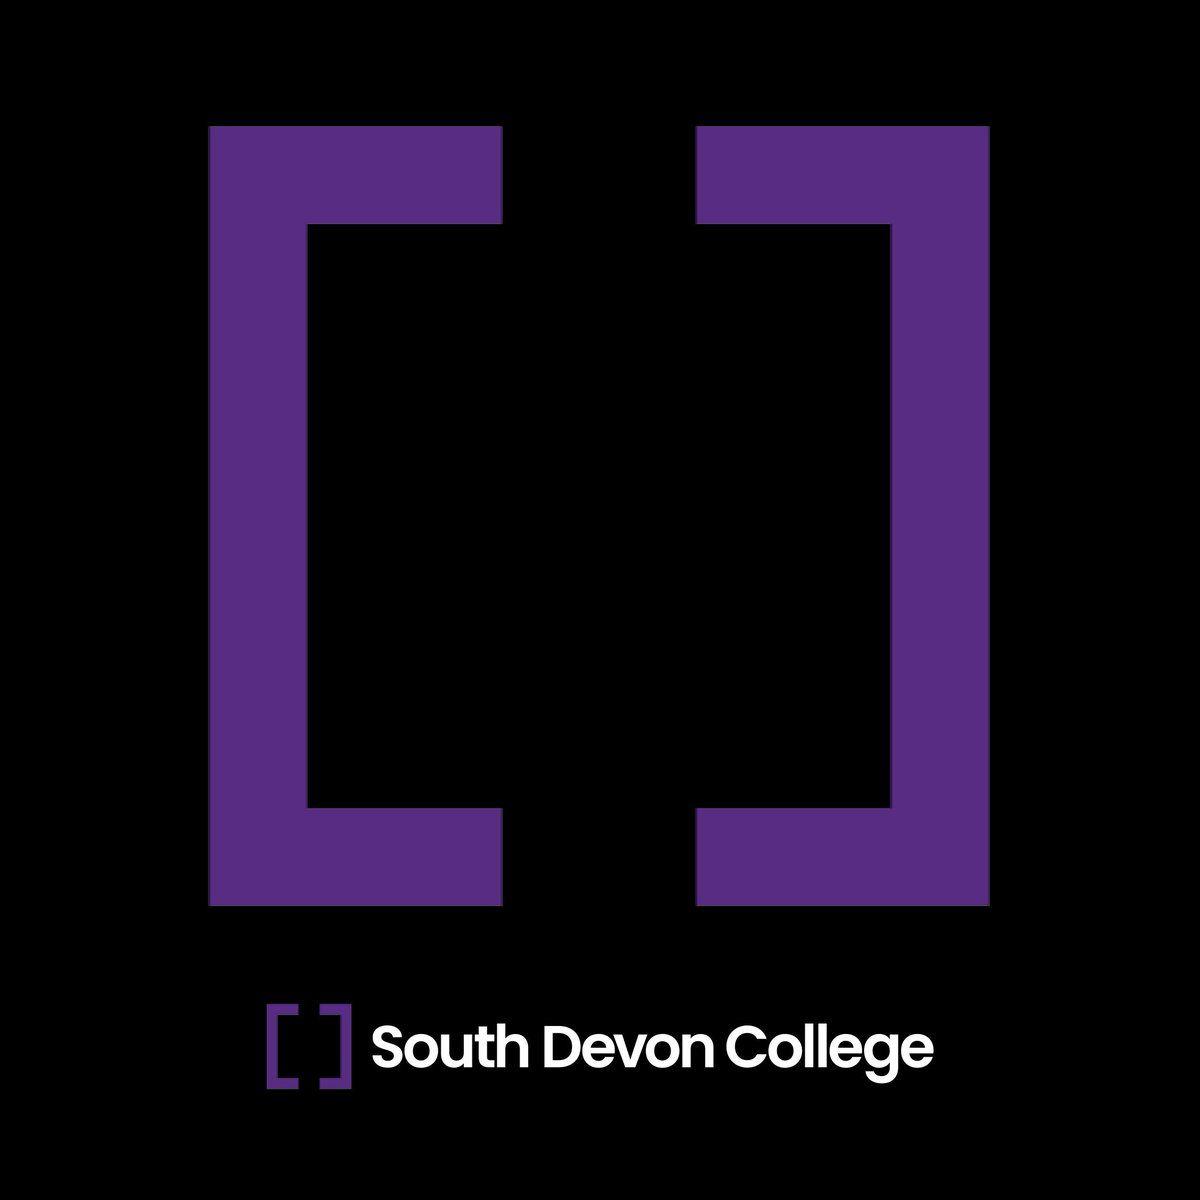 Well Known College Logo - South Devon College we head into the new academic